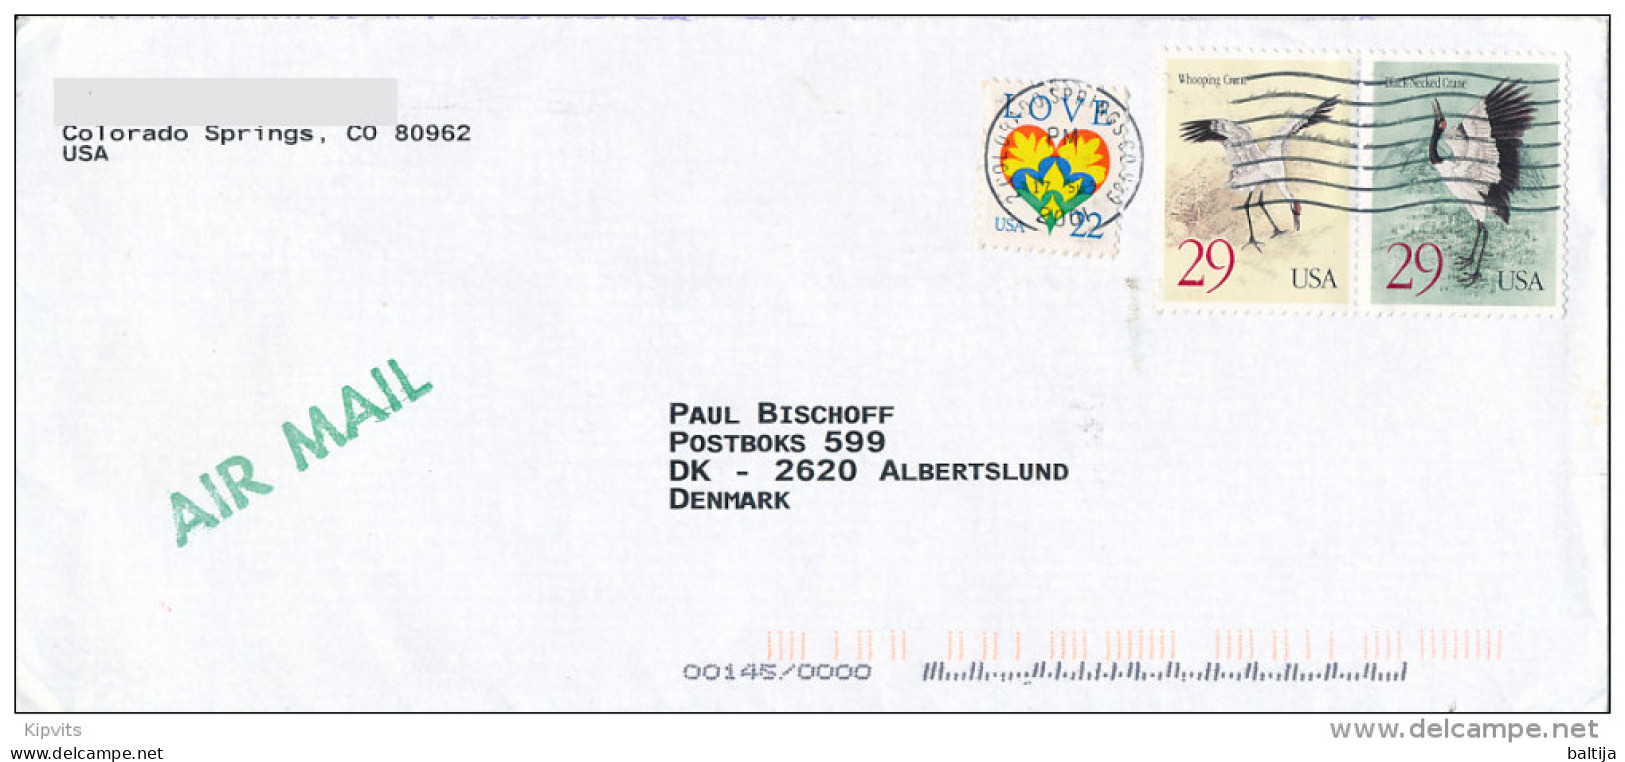 Airmail Cover Abroad / Joint Issue, China, Se-tenant, Crane - 17 September 2001 Colorado Springs CO 809 - Lettres & Documents